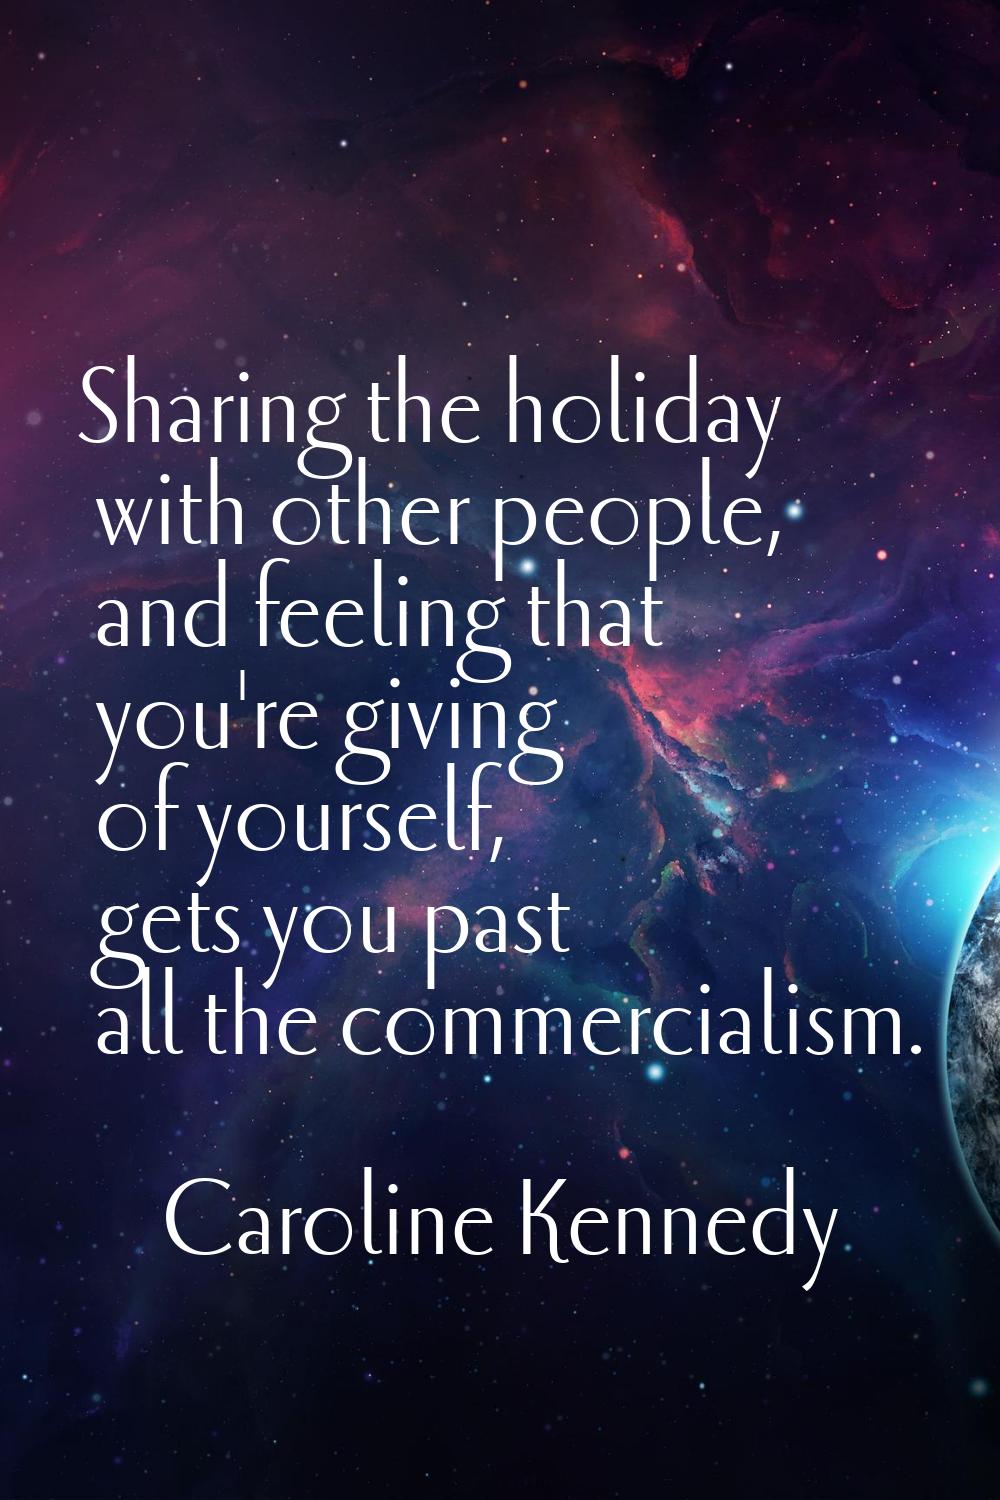 Sharing the holiday with other people, and feeling that you're giving of yourself, gets you past al